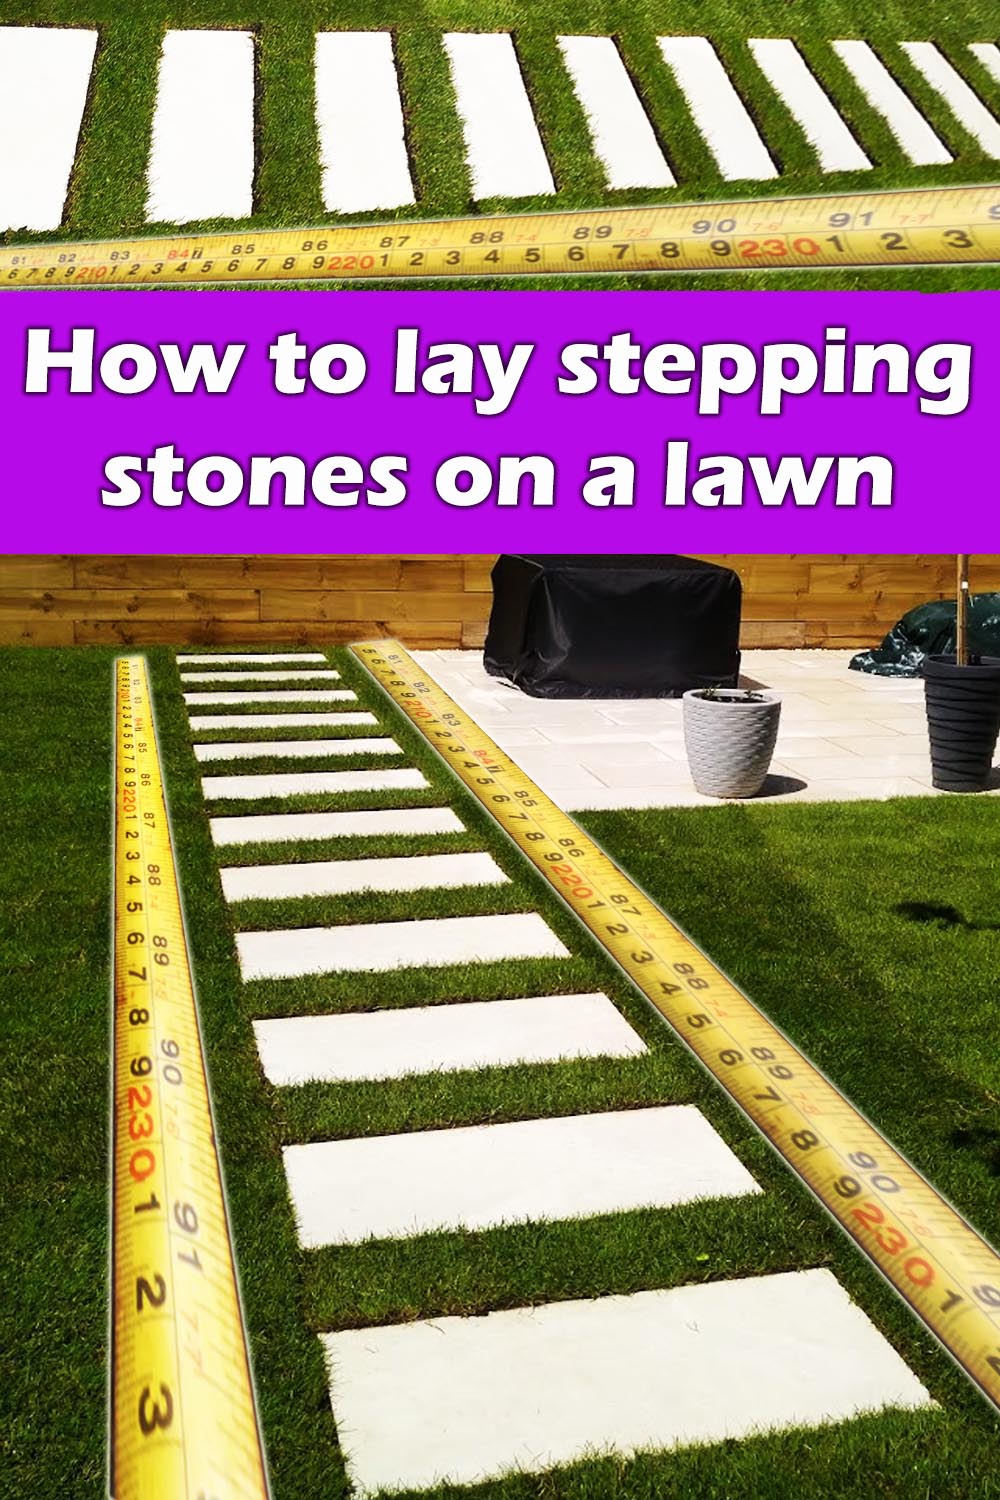 How to lay stepping stones on a lawn